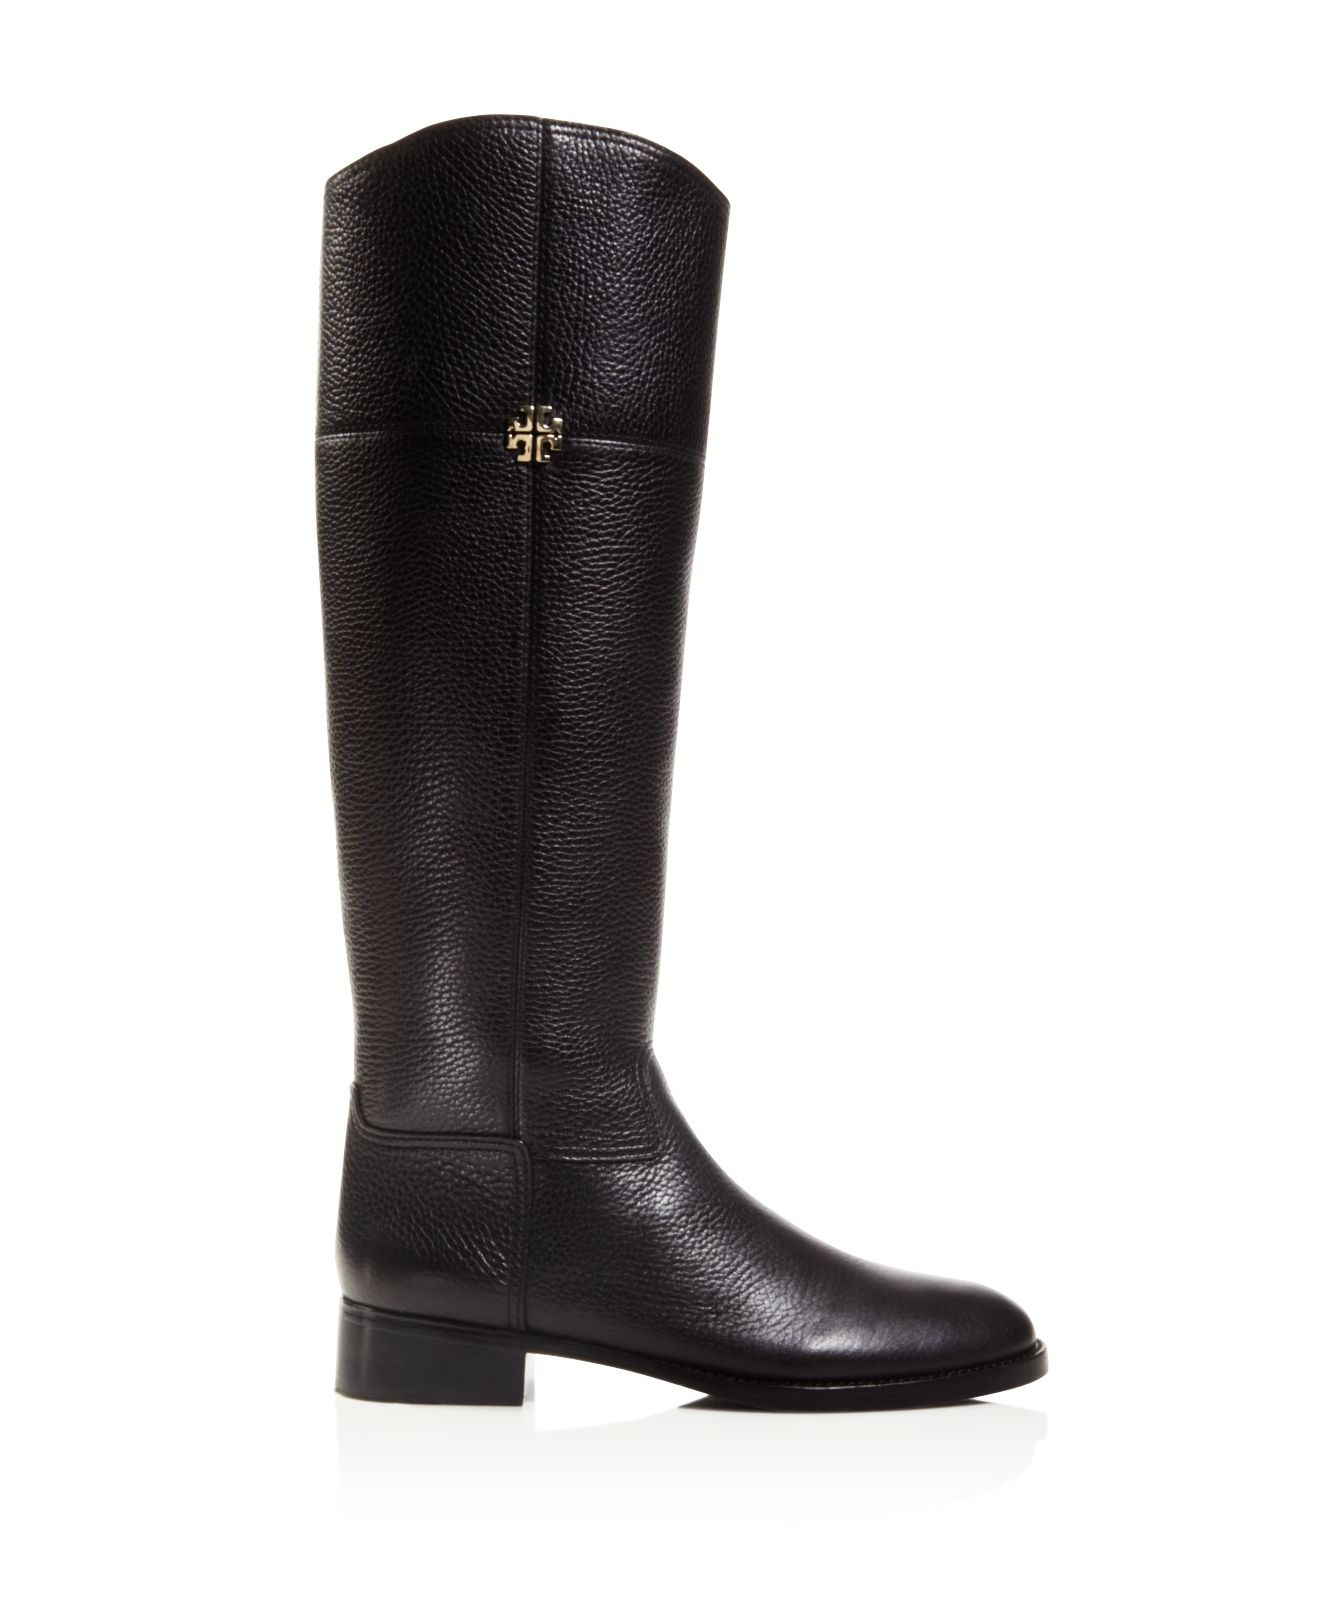 Tory burch Jolie Leather Riding Boot in Black | Lyst